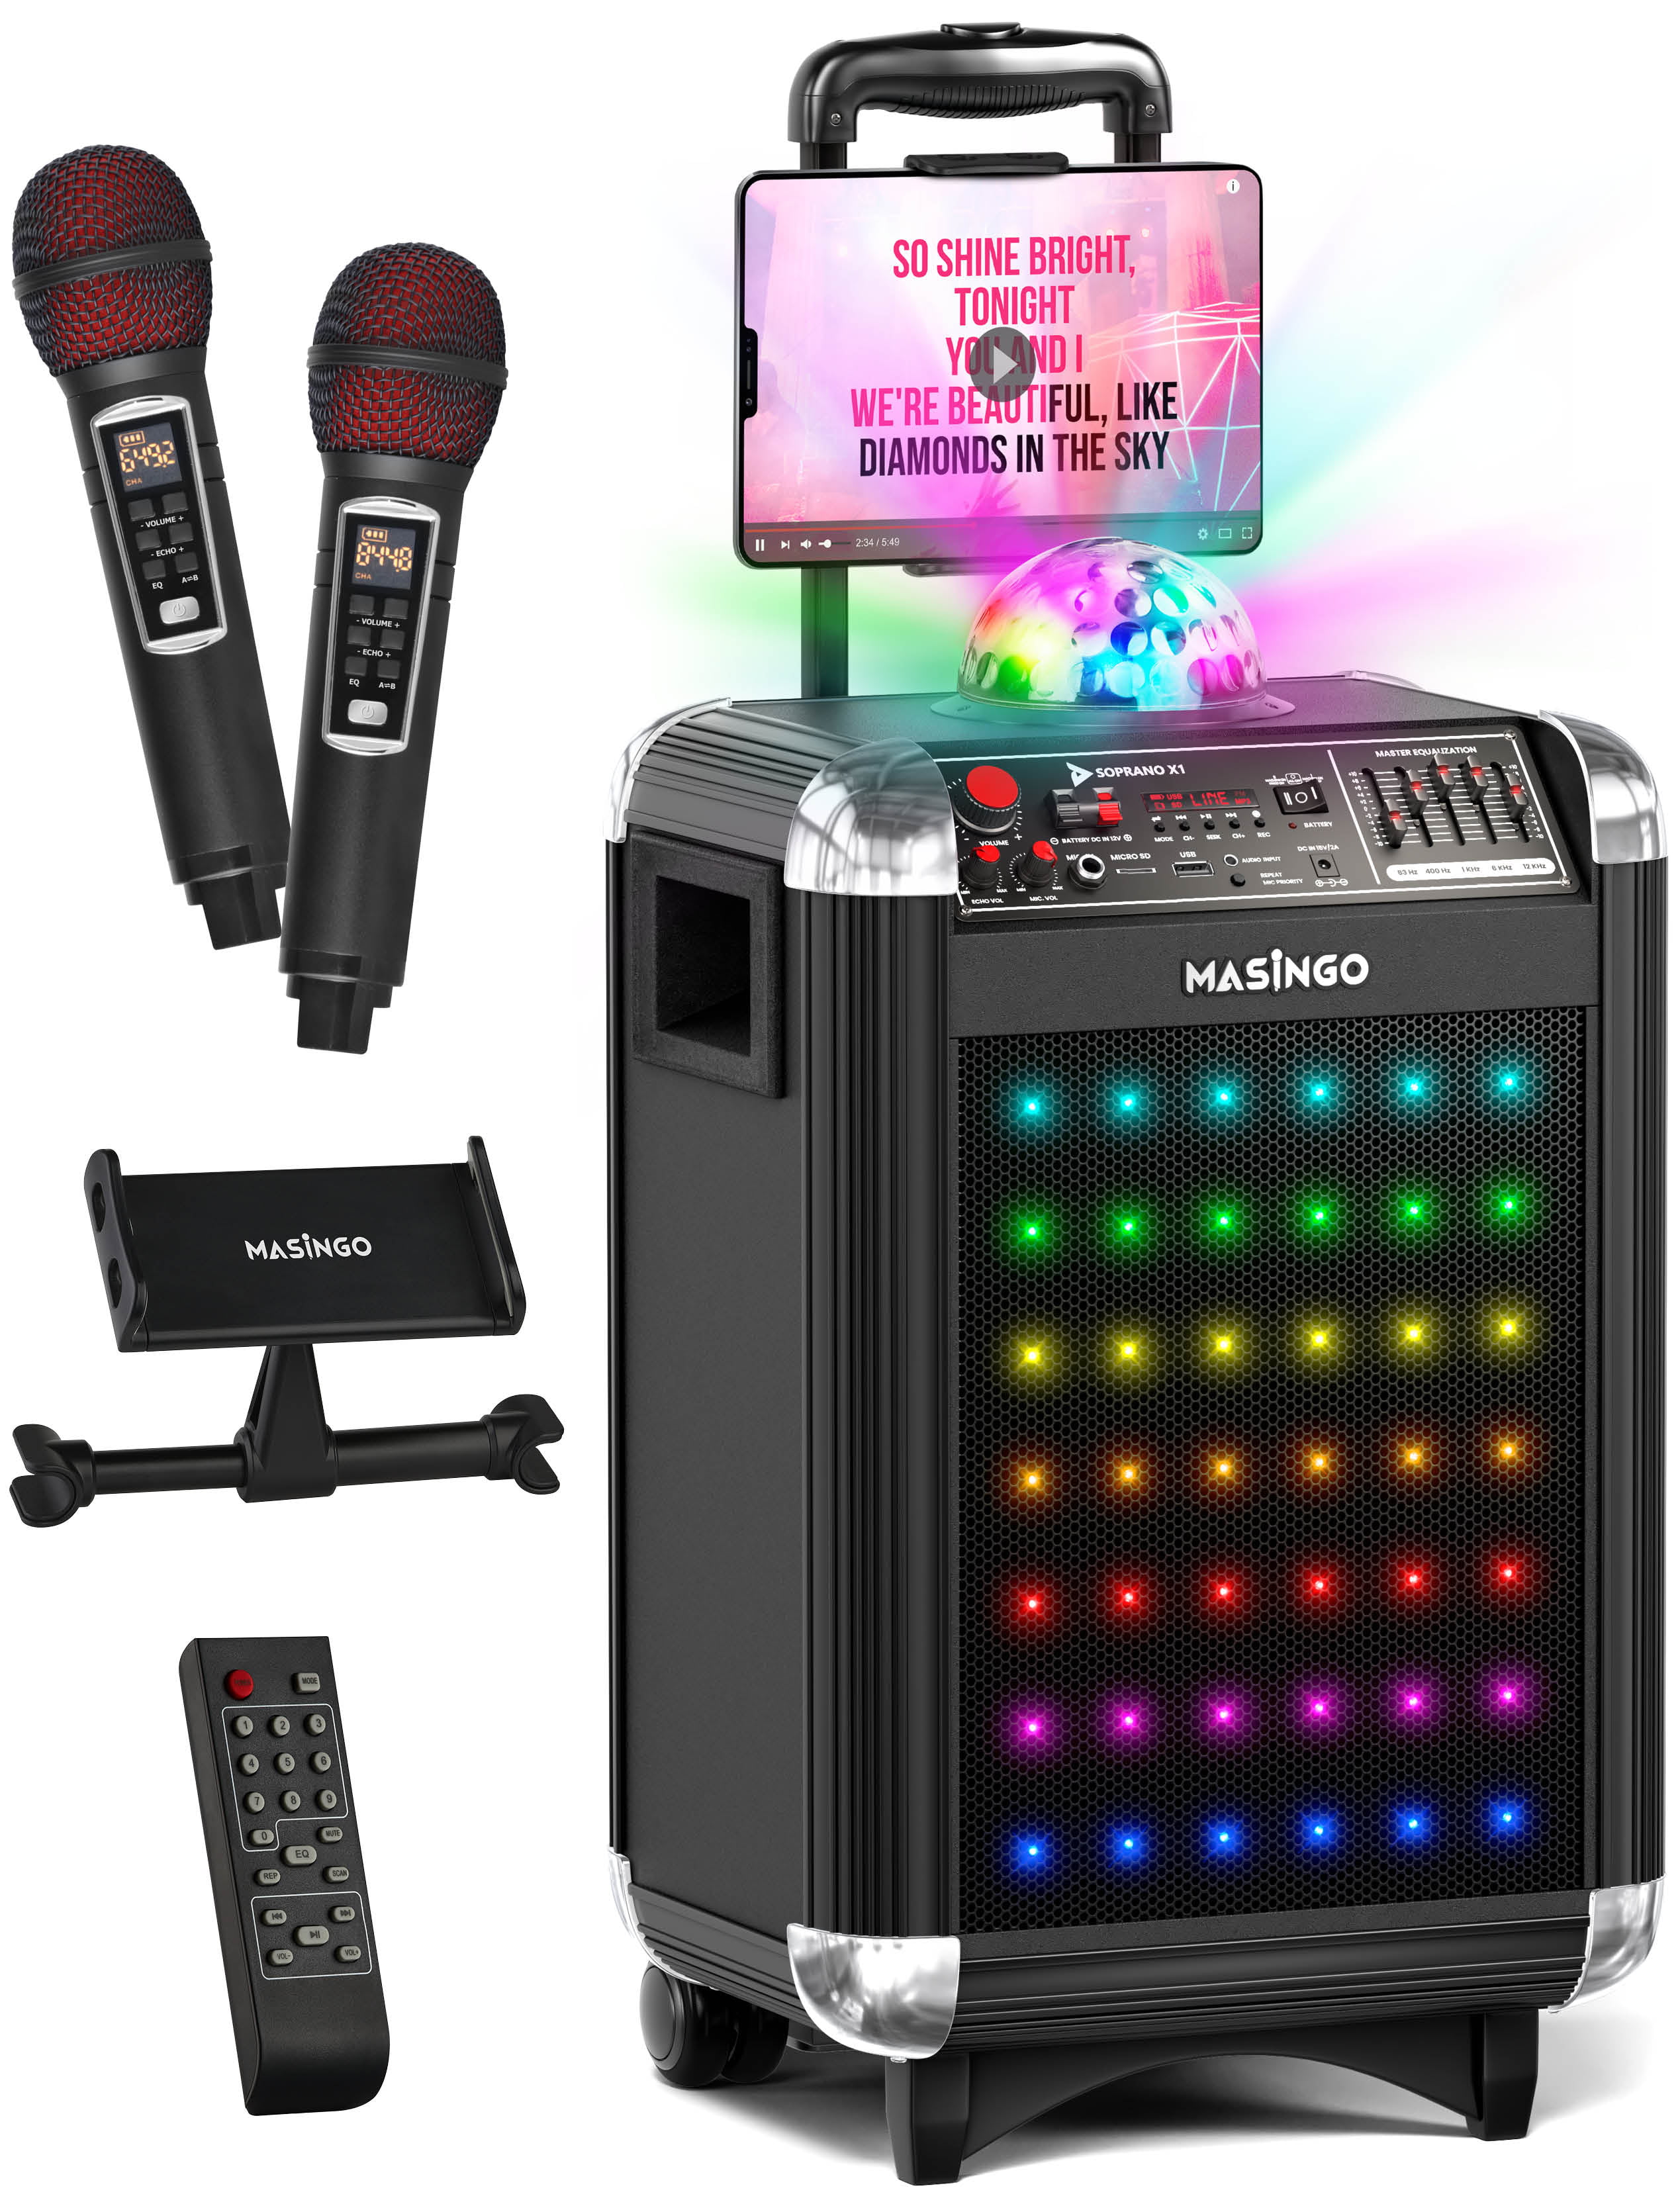 Rechargeable Remote Control Wireless Portable Karaoke Machine Speaker Home Karaoke System Music Player for Kids Adult Party Kids Bluetooth Karaoke Machine with 2 Microphones Black 